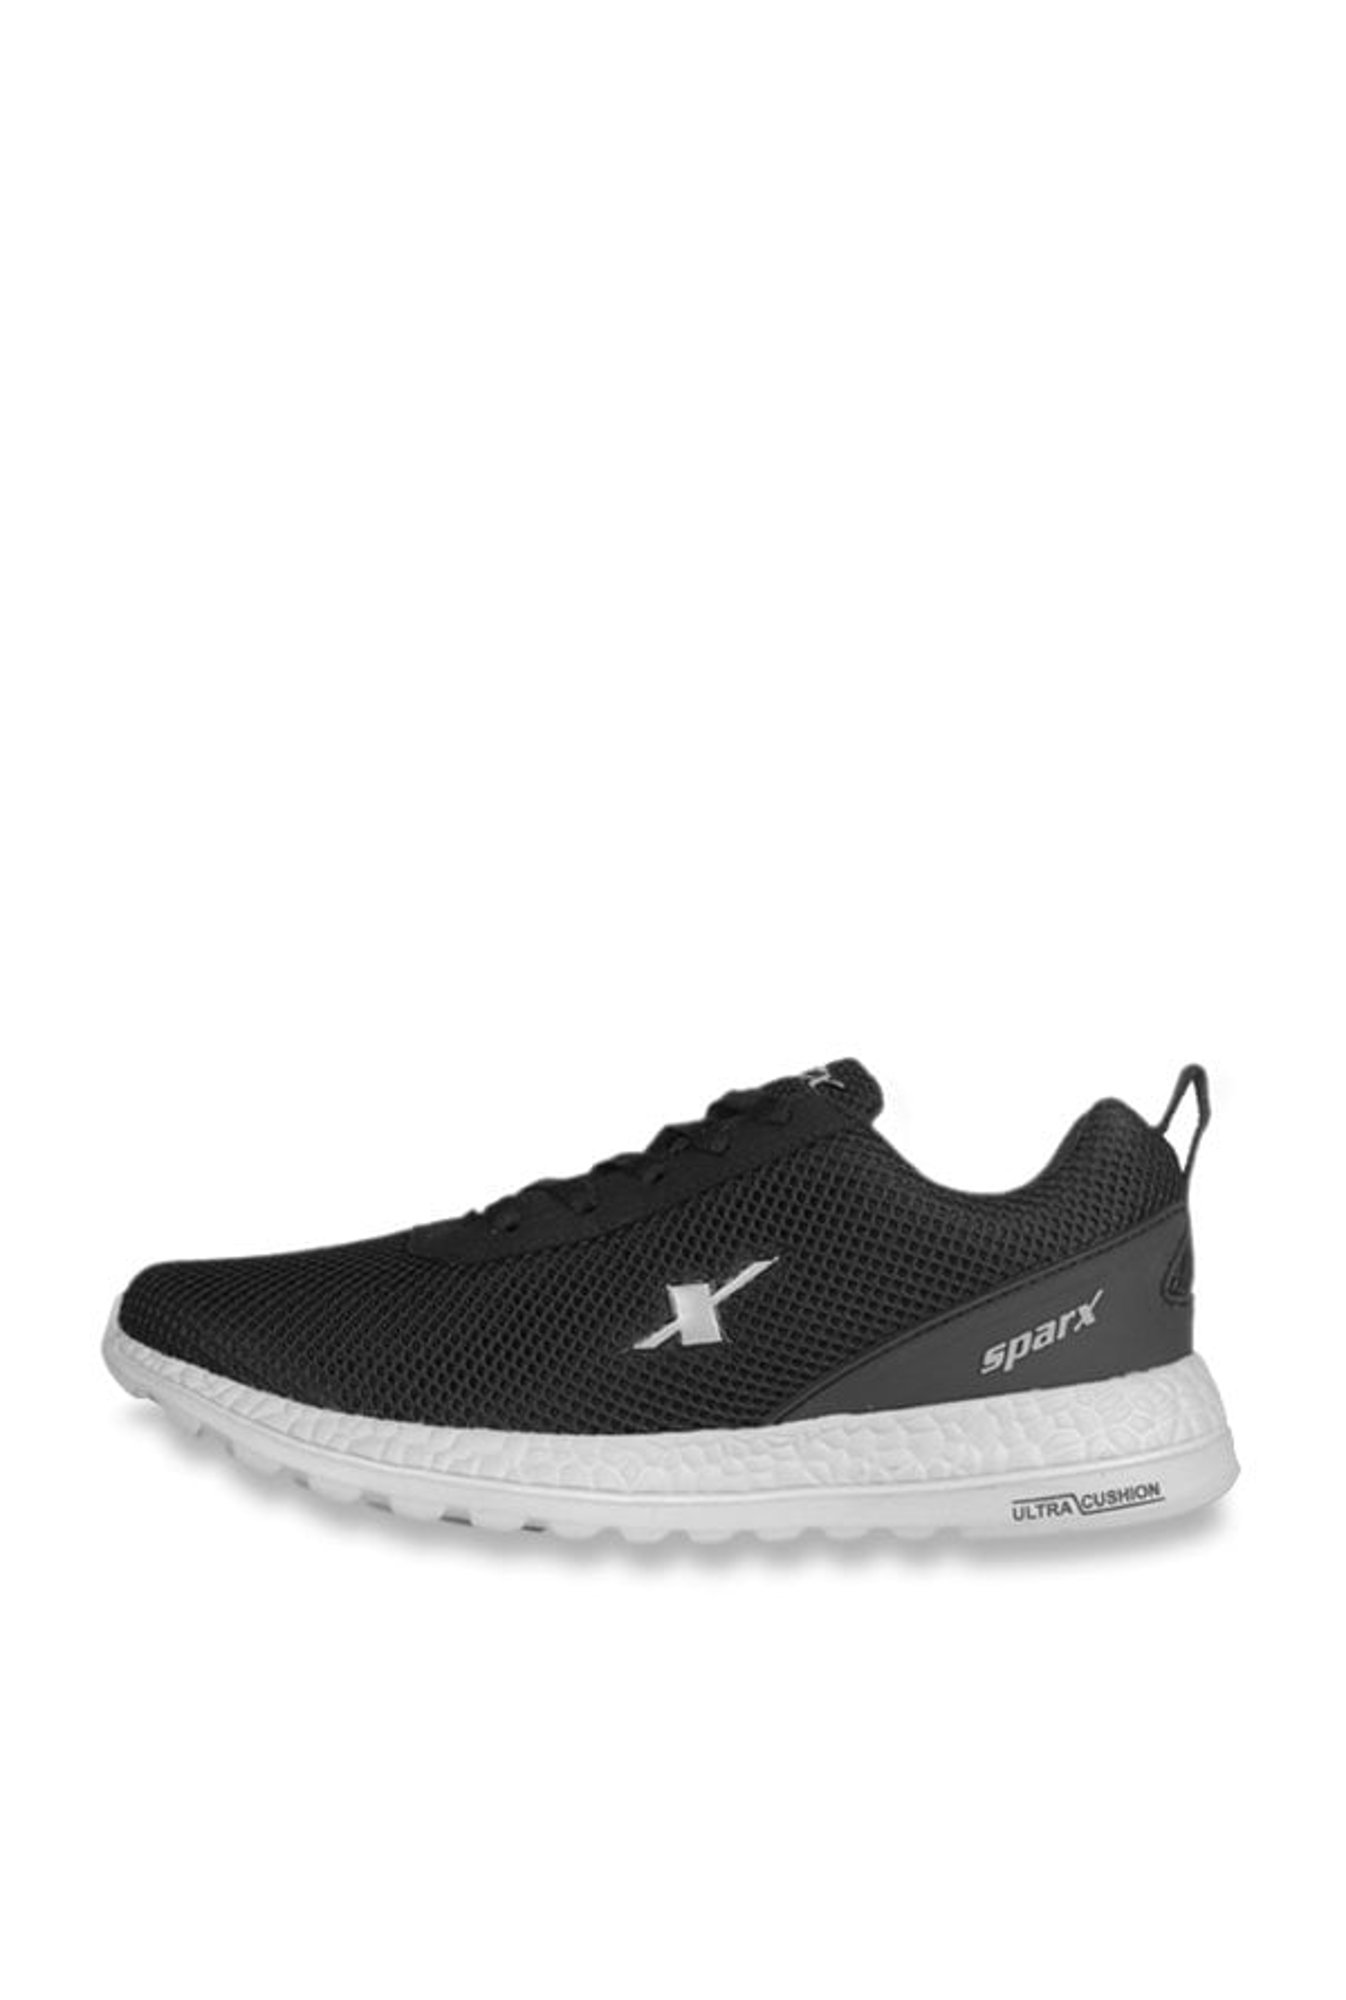 Buy Sparx Carbon Black Running Shoes 